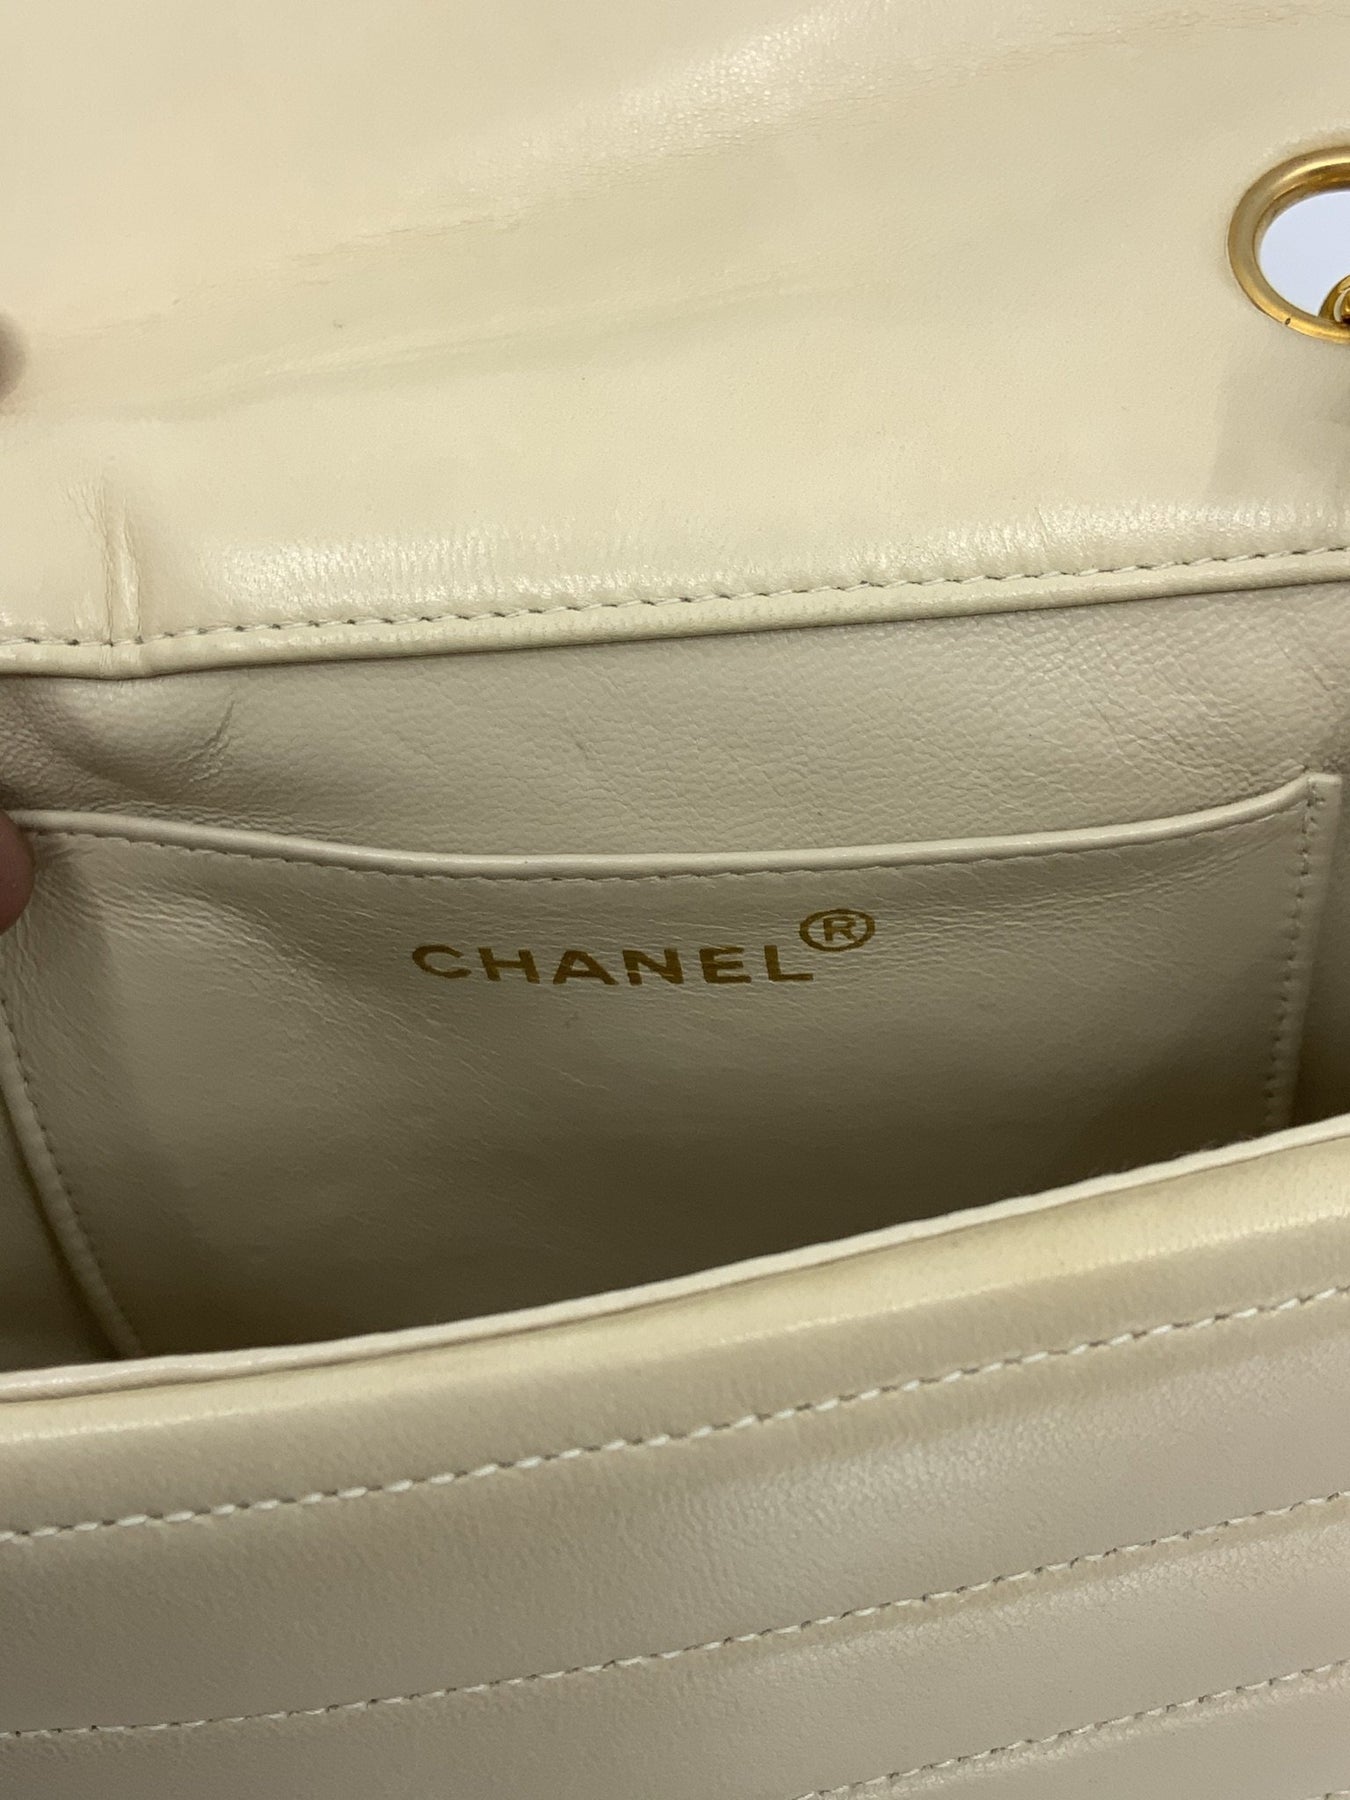 Chanel Vintage Quilted Horizontal Stitch Lambskin Classic Flap Bag